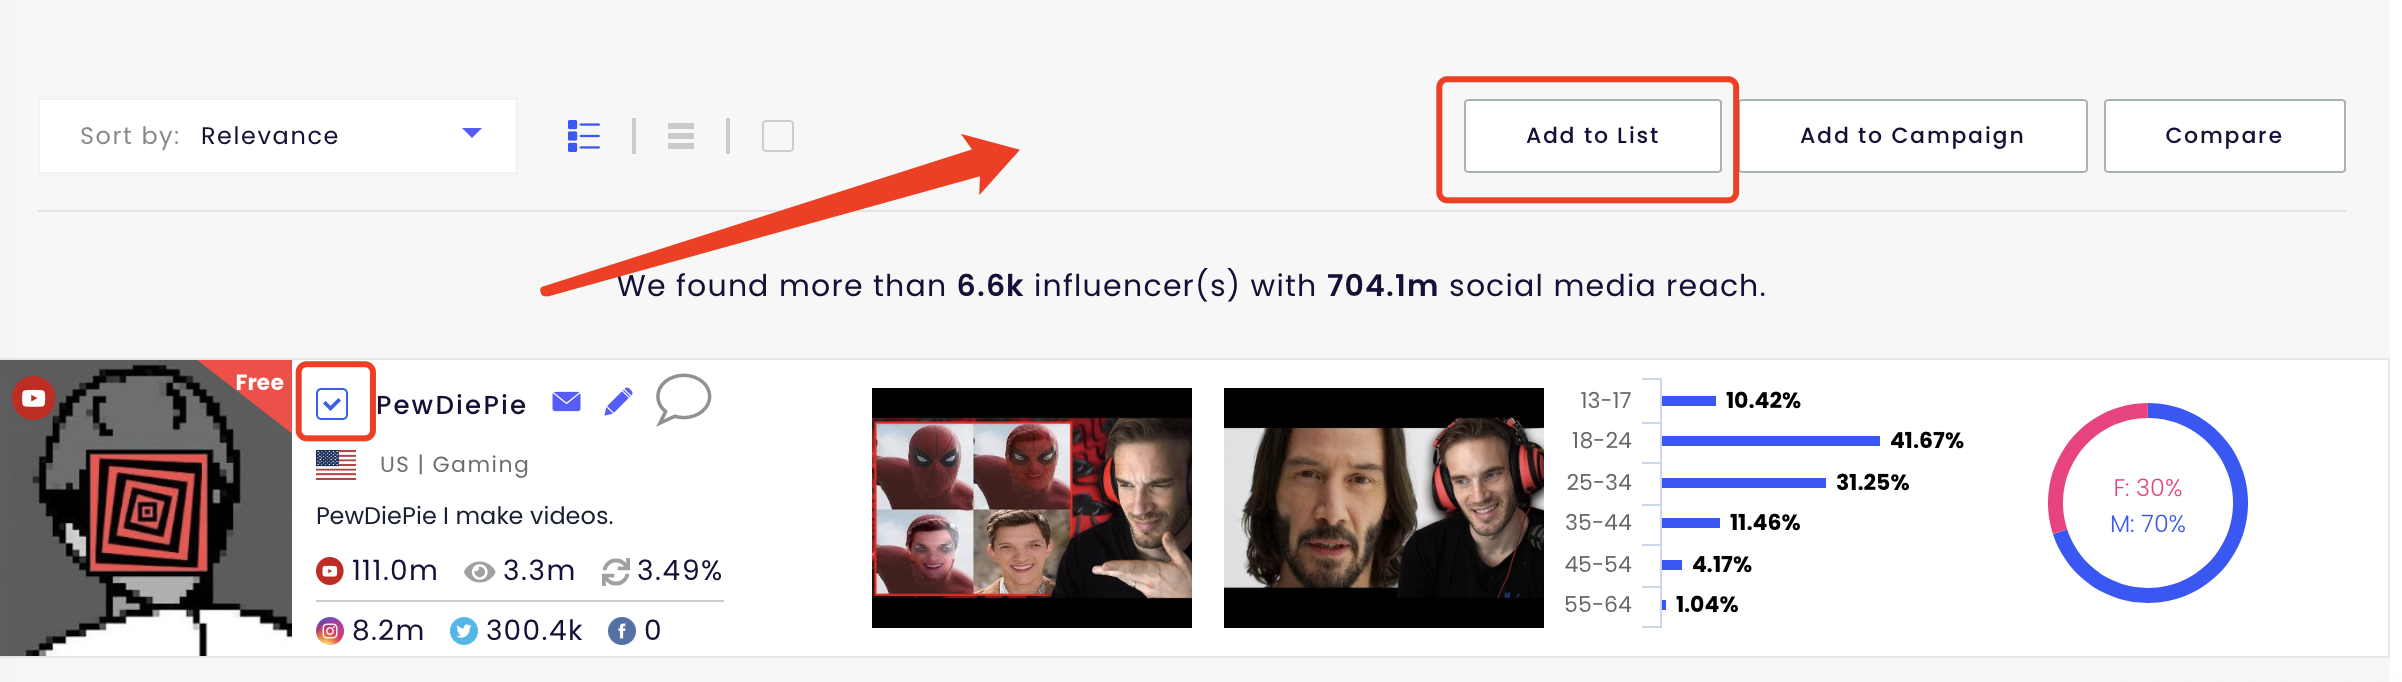 Add influencer to list from the search results page.